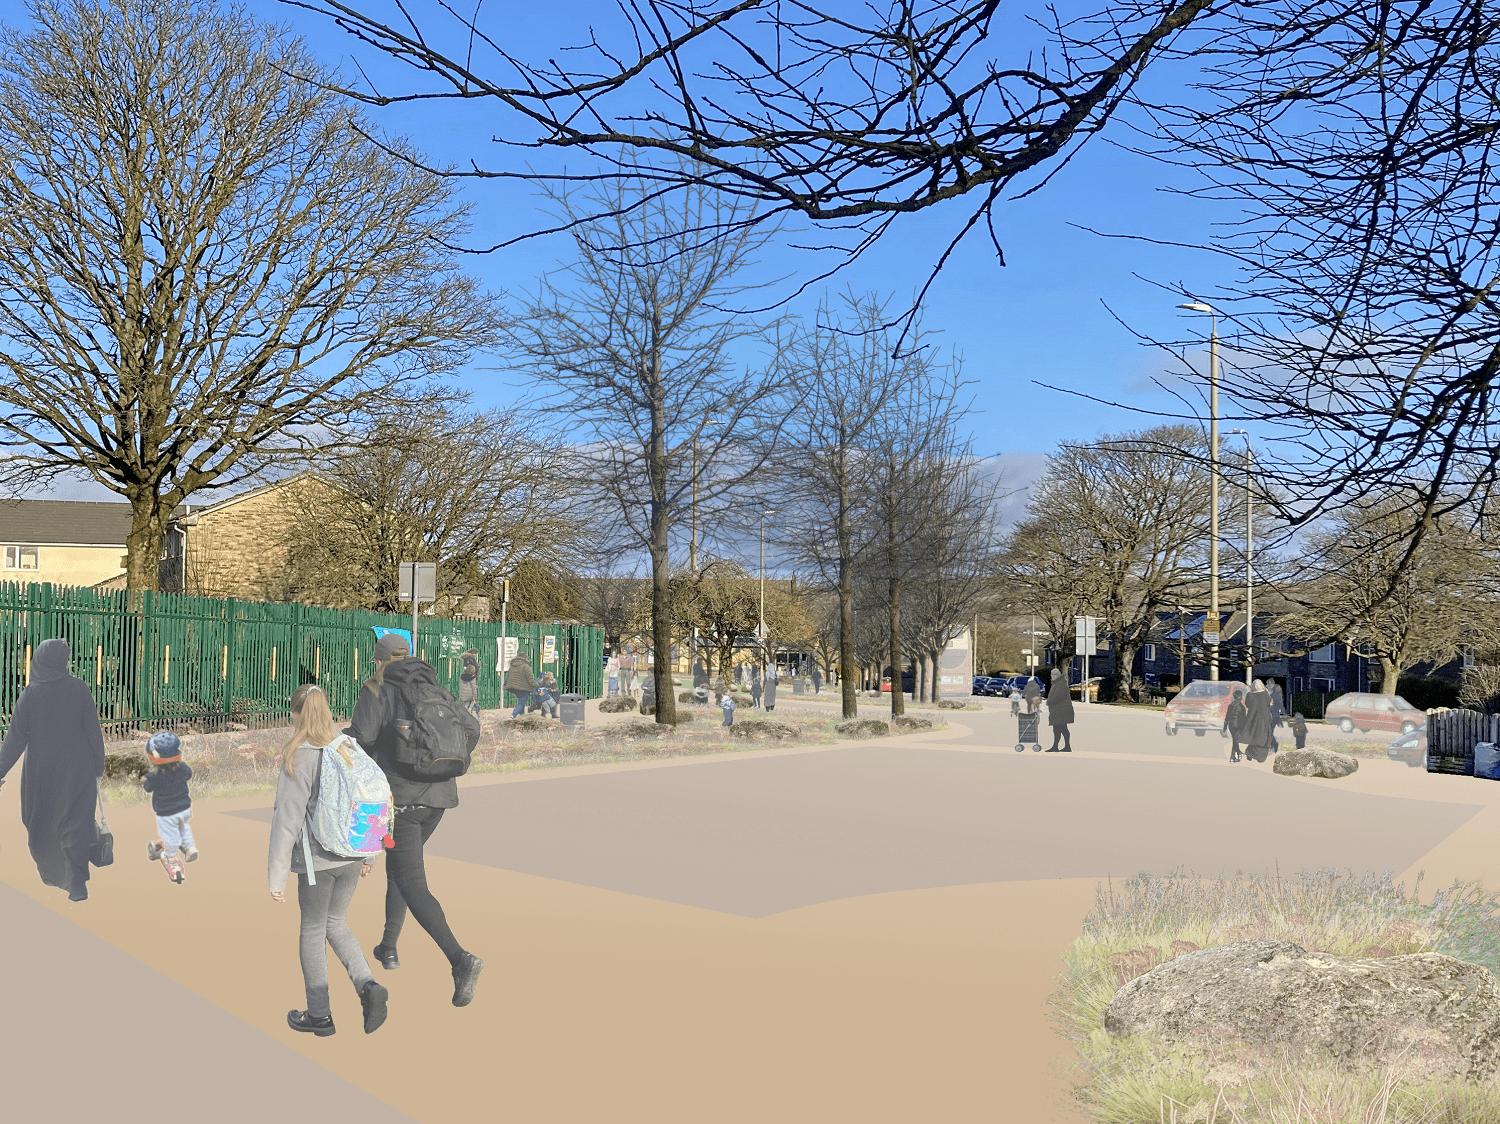 Visualisation of proposals showing changes prioritising pedestrians. View along Highroad Well Lane.